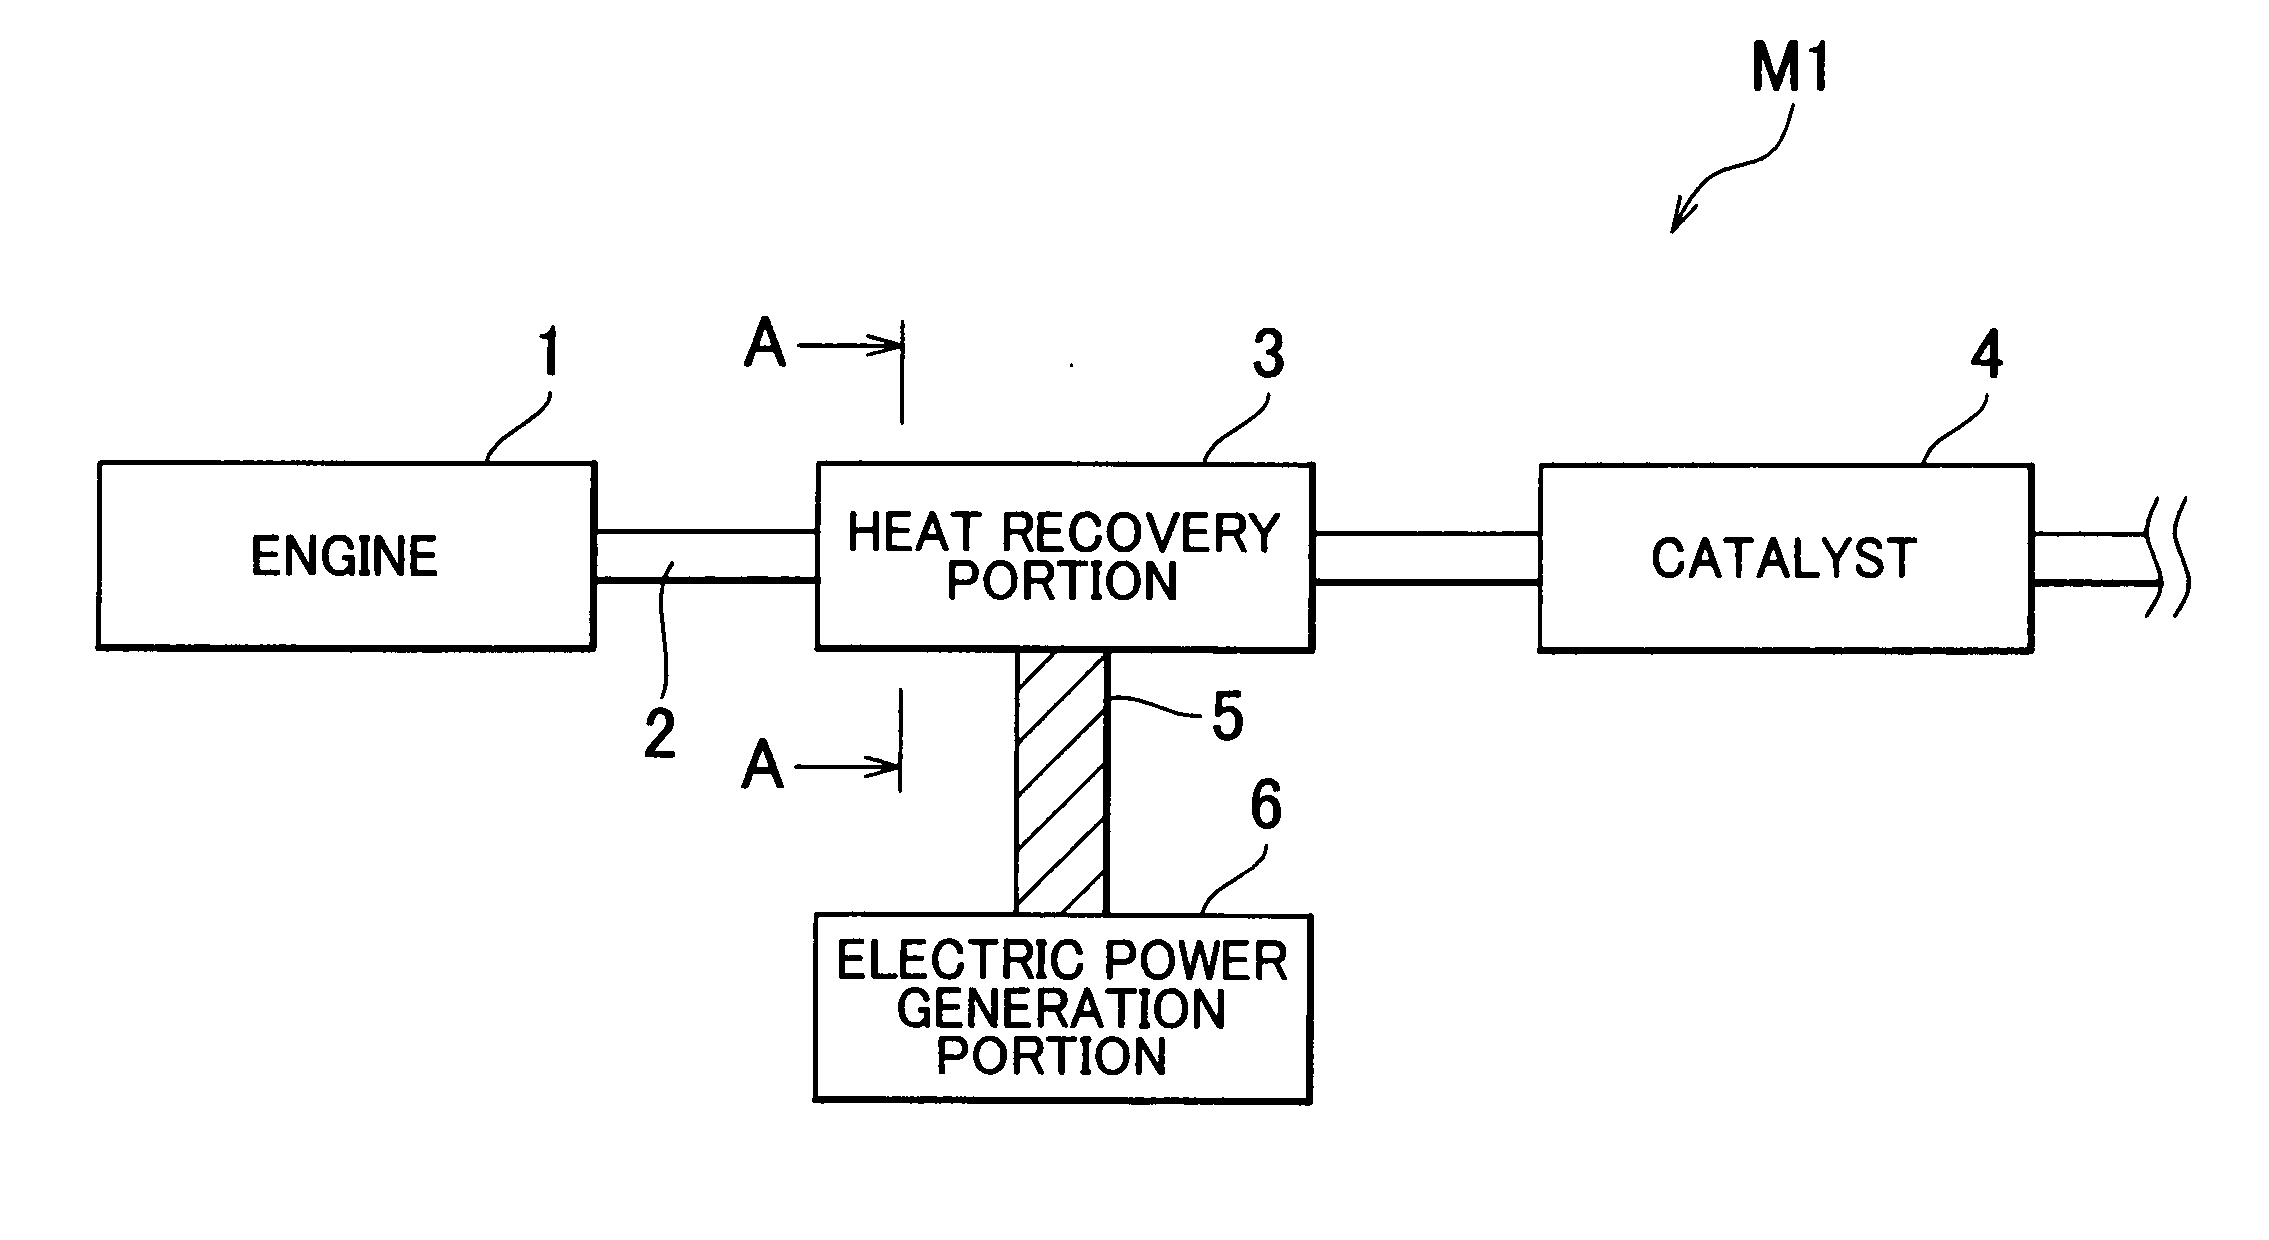 Exhaust heat recovery system